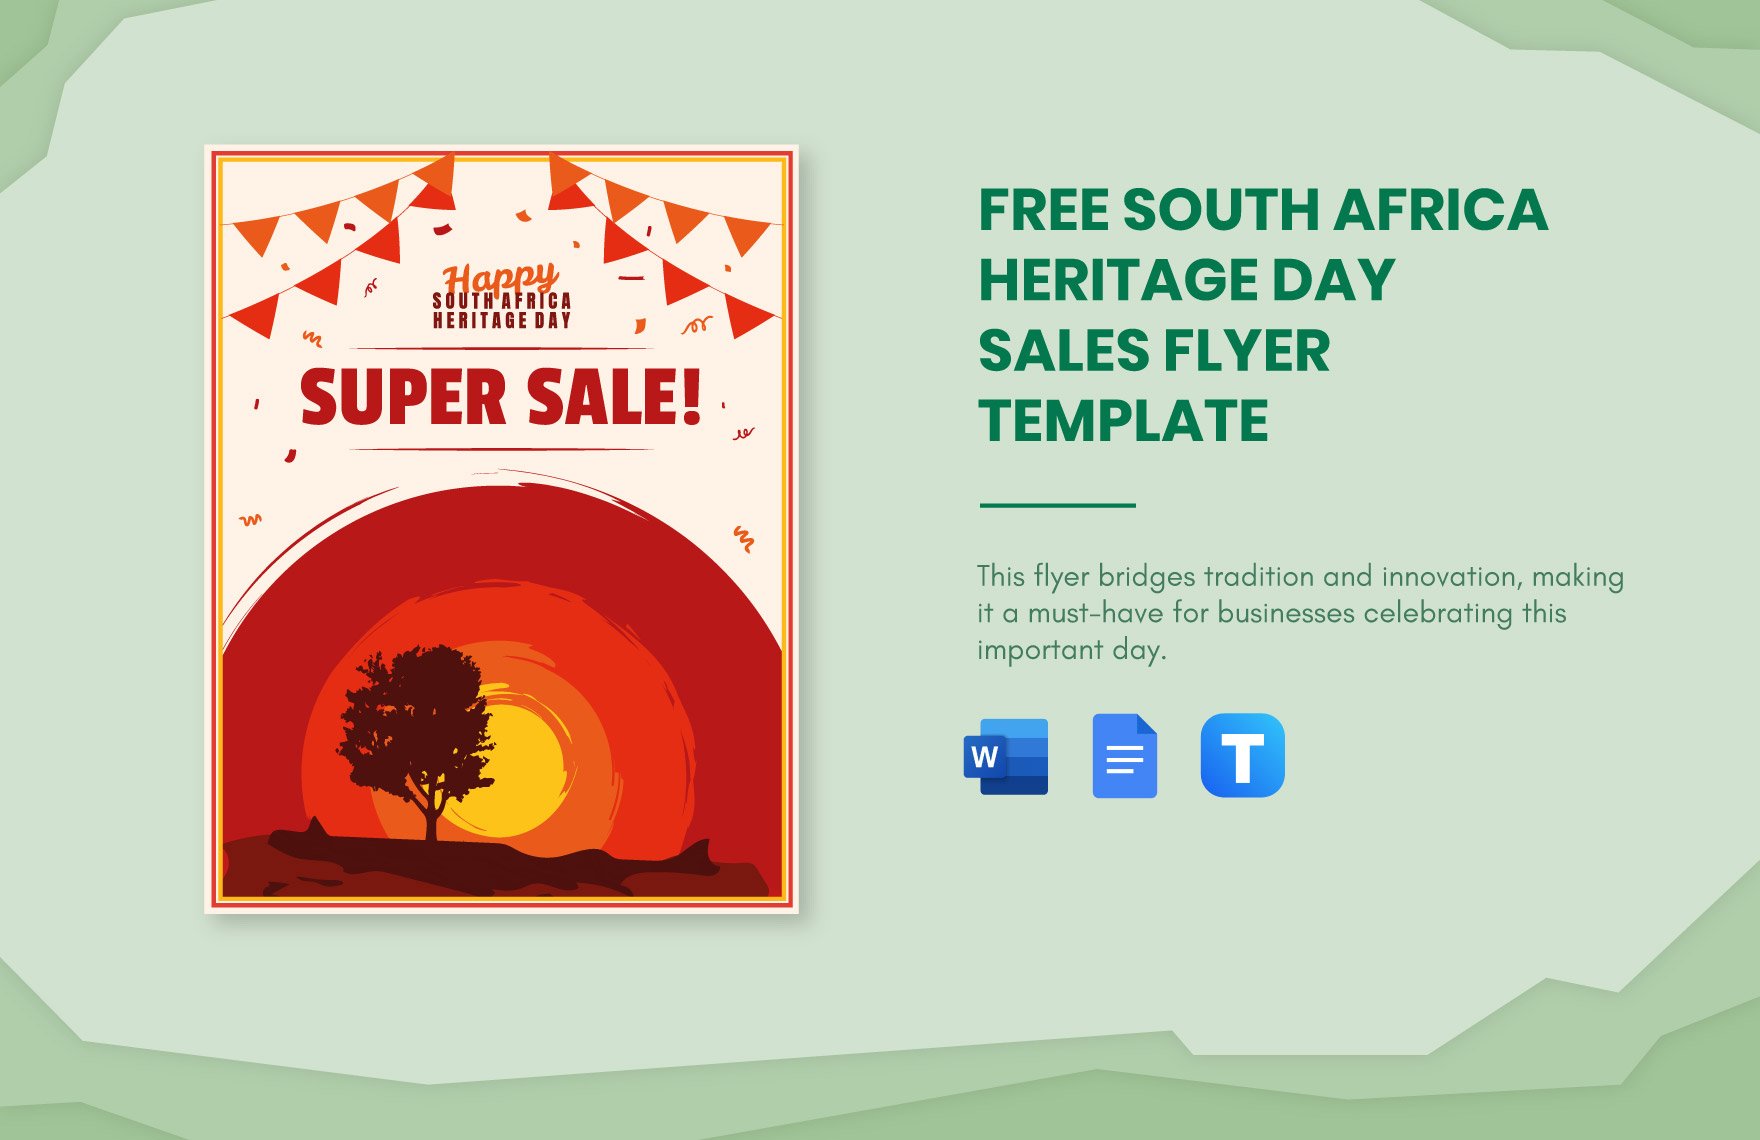 Free South Africa Heritage Day Sales Flyer Template in Word, Google Docs